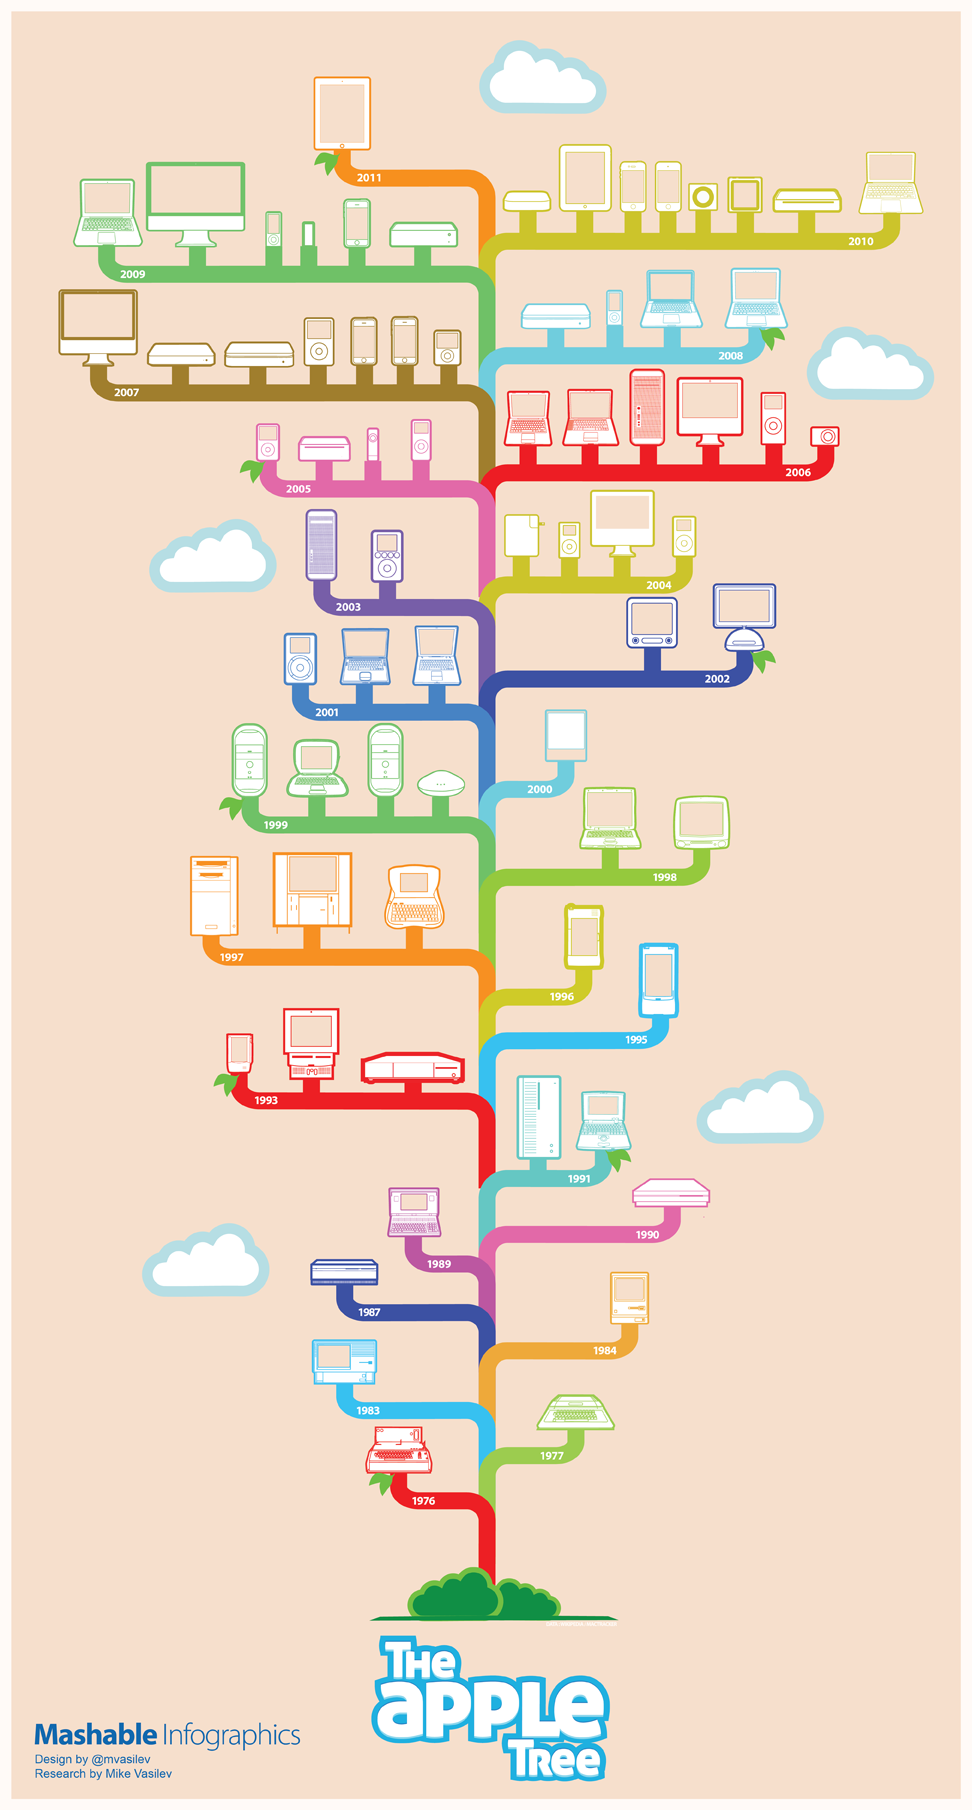 35 Years of Apple Products (INFOGRAPHIC)